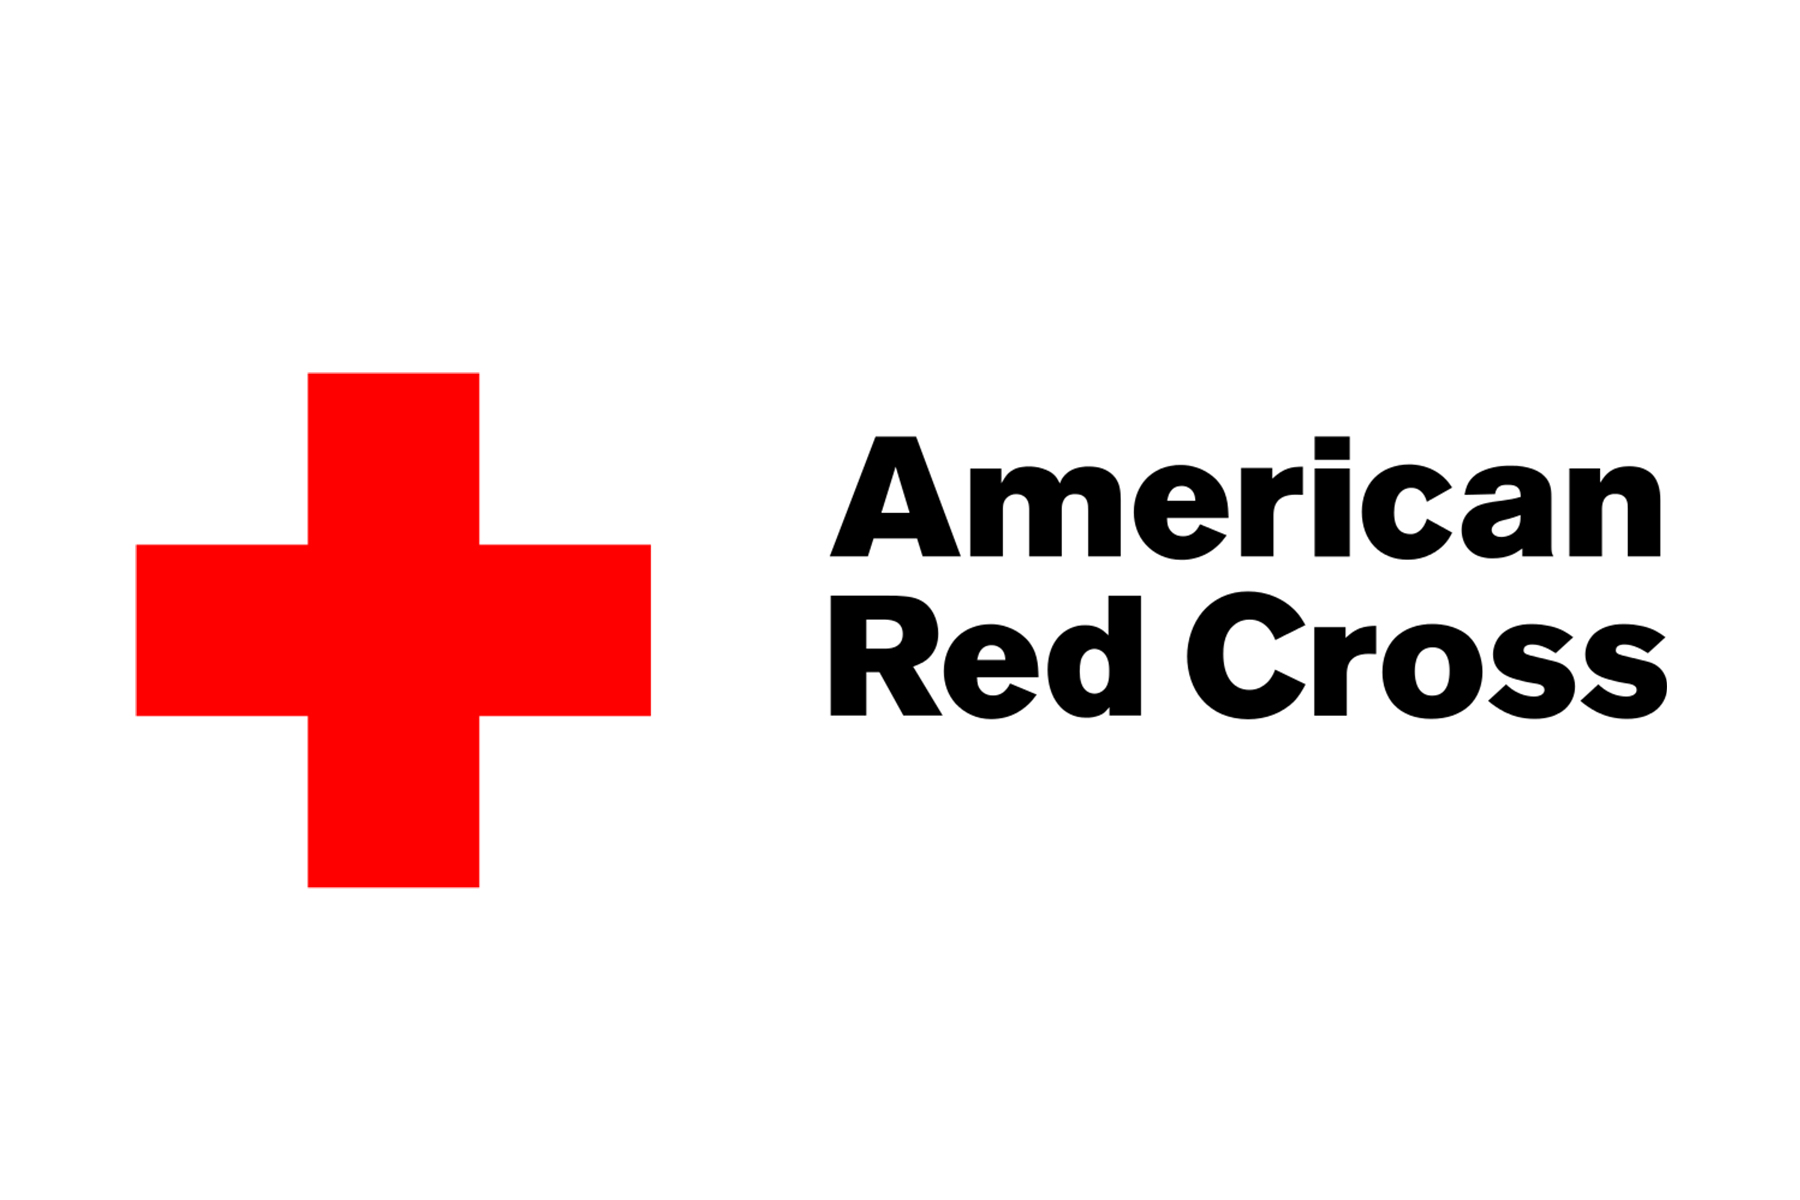 Blood Drive with American Red Cross